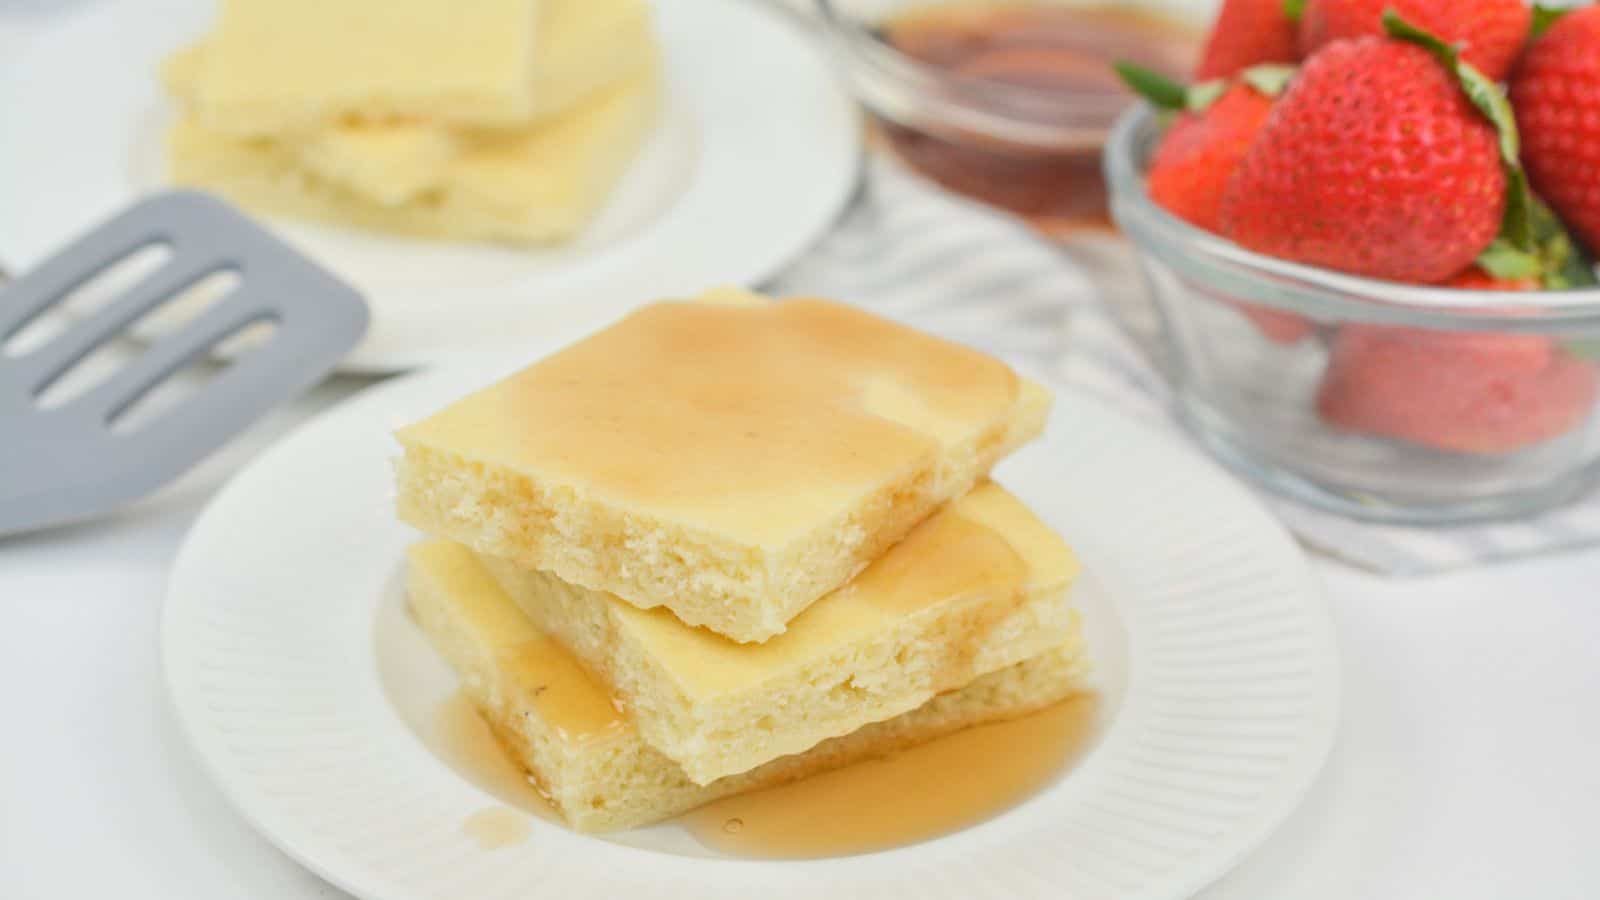 A plate of square pancakes drizzled with syrup, next to strawberries and a cup of maple syrup on a white tablecloth.